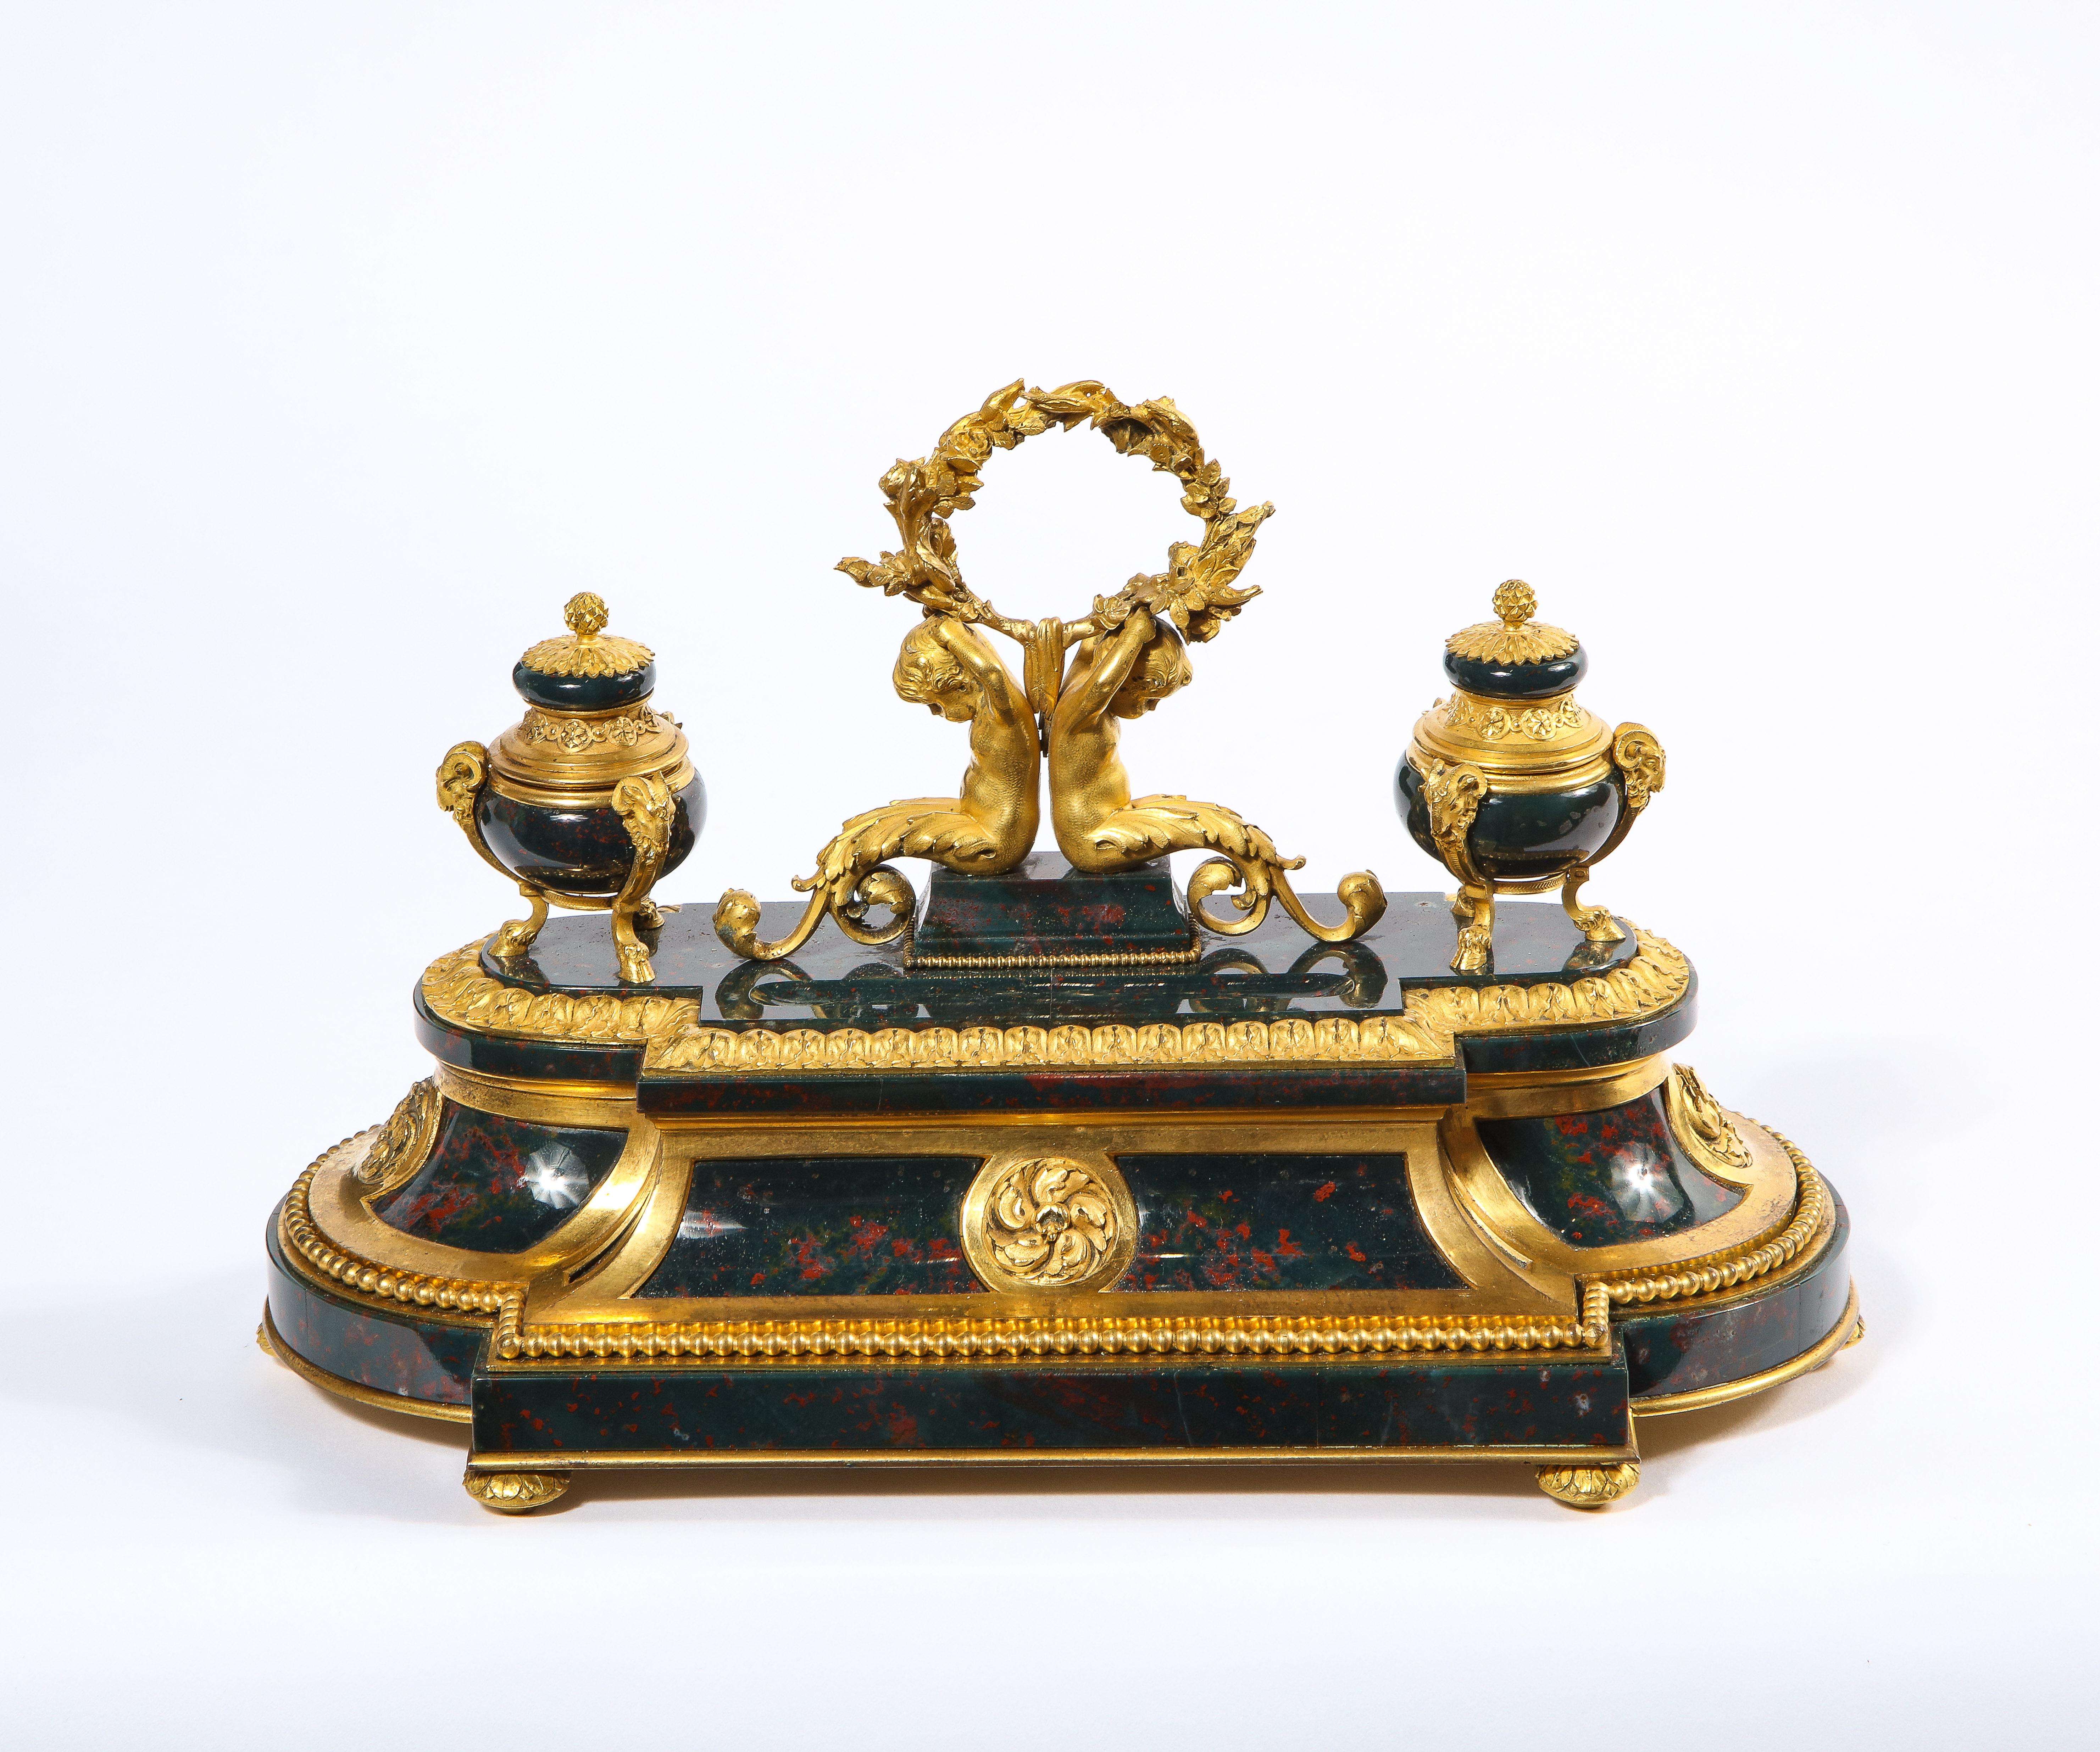 An Exquisite and Rare French Louis XVI Style Ormolu-Mounted Bloodstone Inkwell, circa 1875.

A truly exceptional and jewel like quality inkwell encrier, made with the finest ormolu, mounted on bloodstone. A true collectors and one of a kind